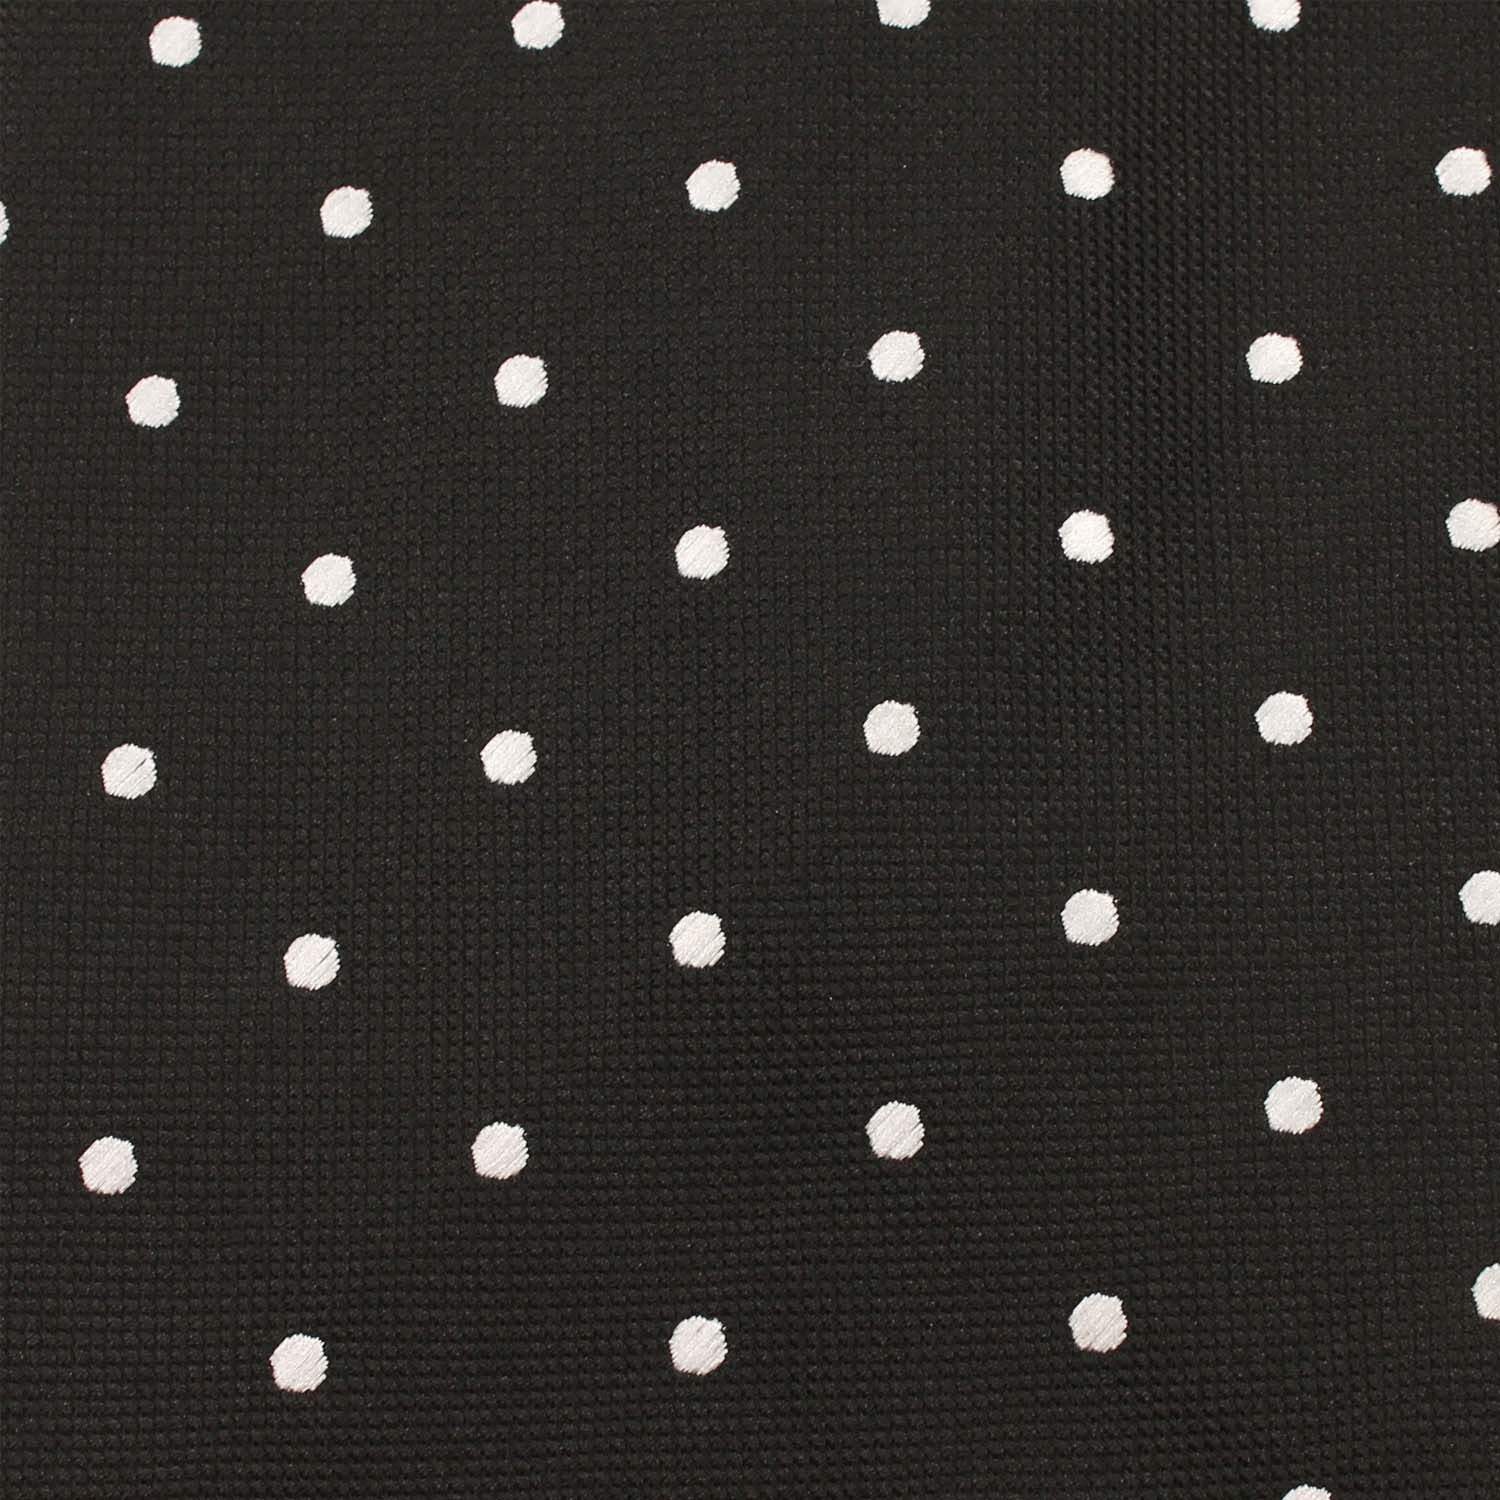 Coal Black with White Polka Dots Fabric Kids Bow Tie X327